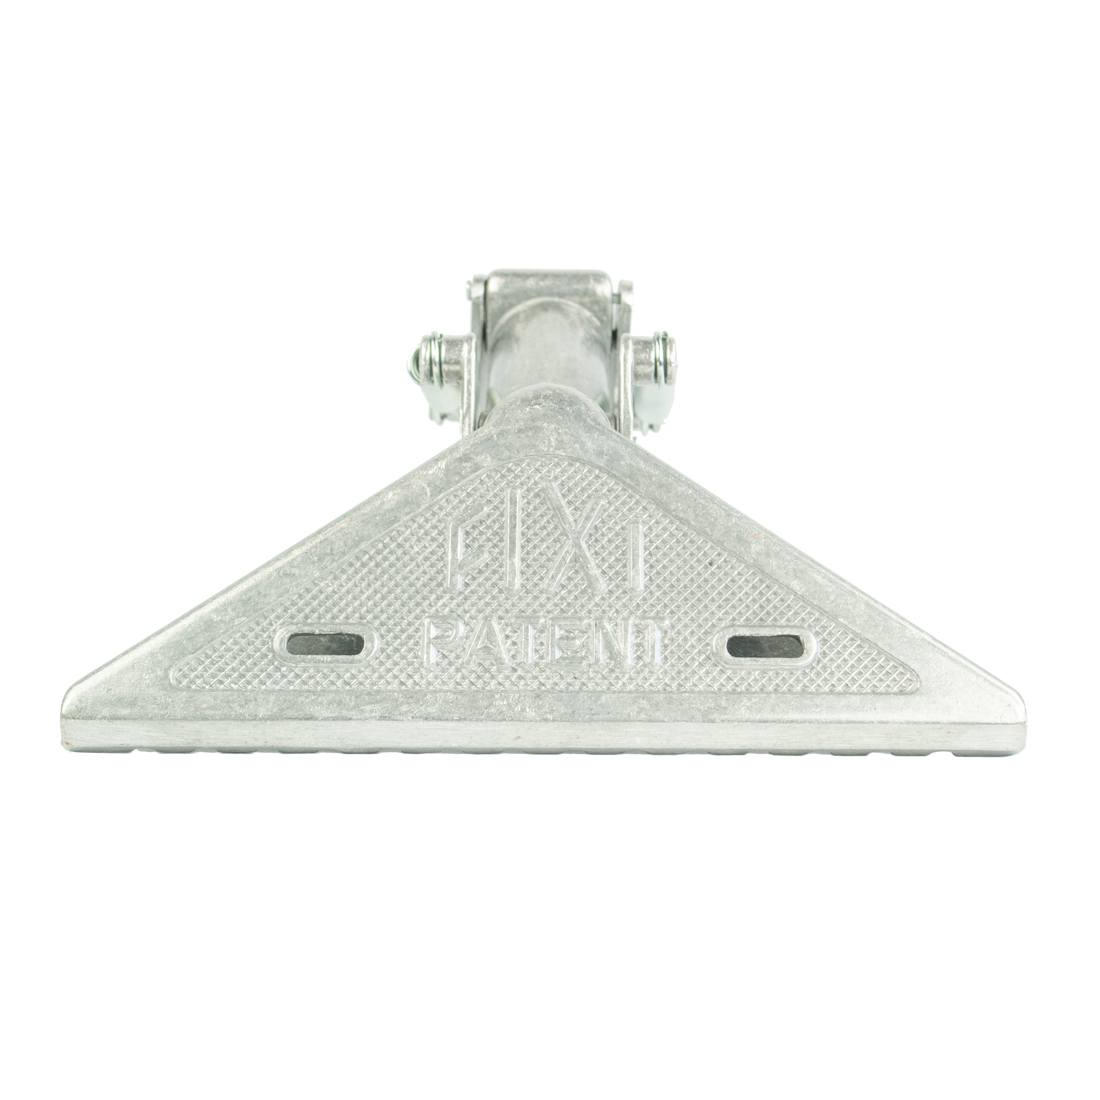 Pulex Multipurpose Clamp for Pole - Front View